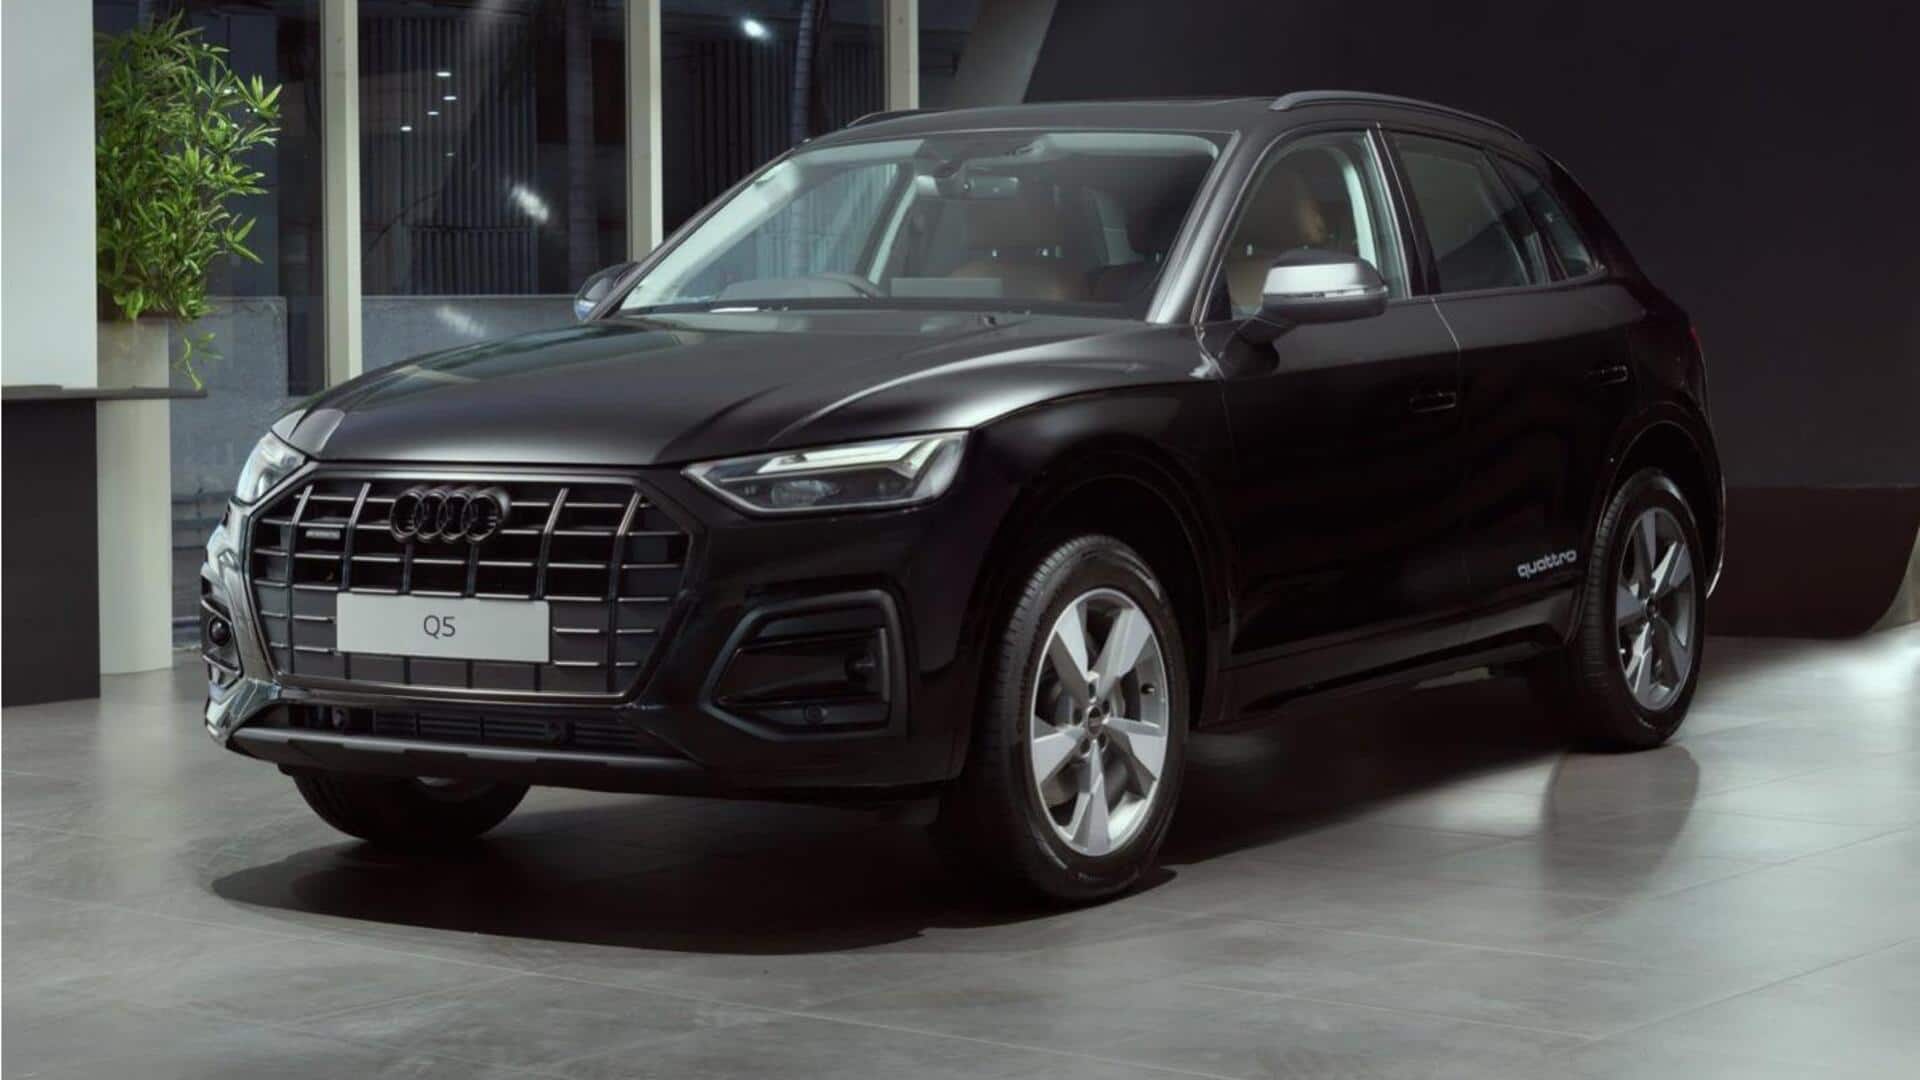 Audi Q5 Limited Edition goes official at Rs. 70 lakh